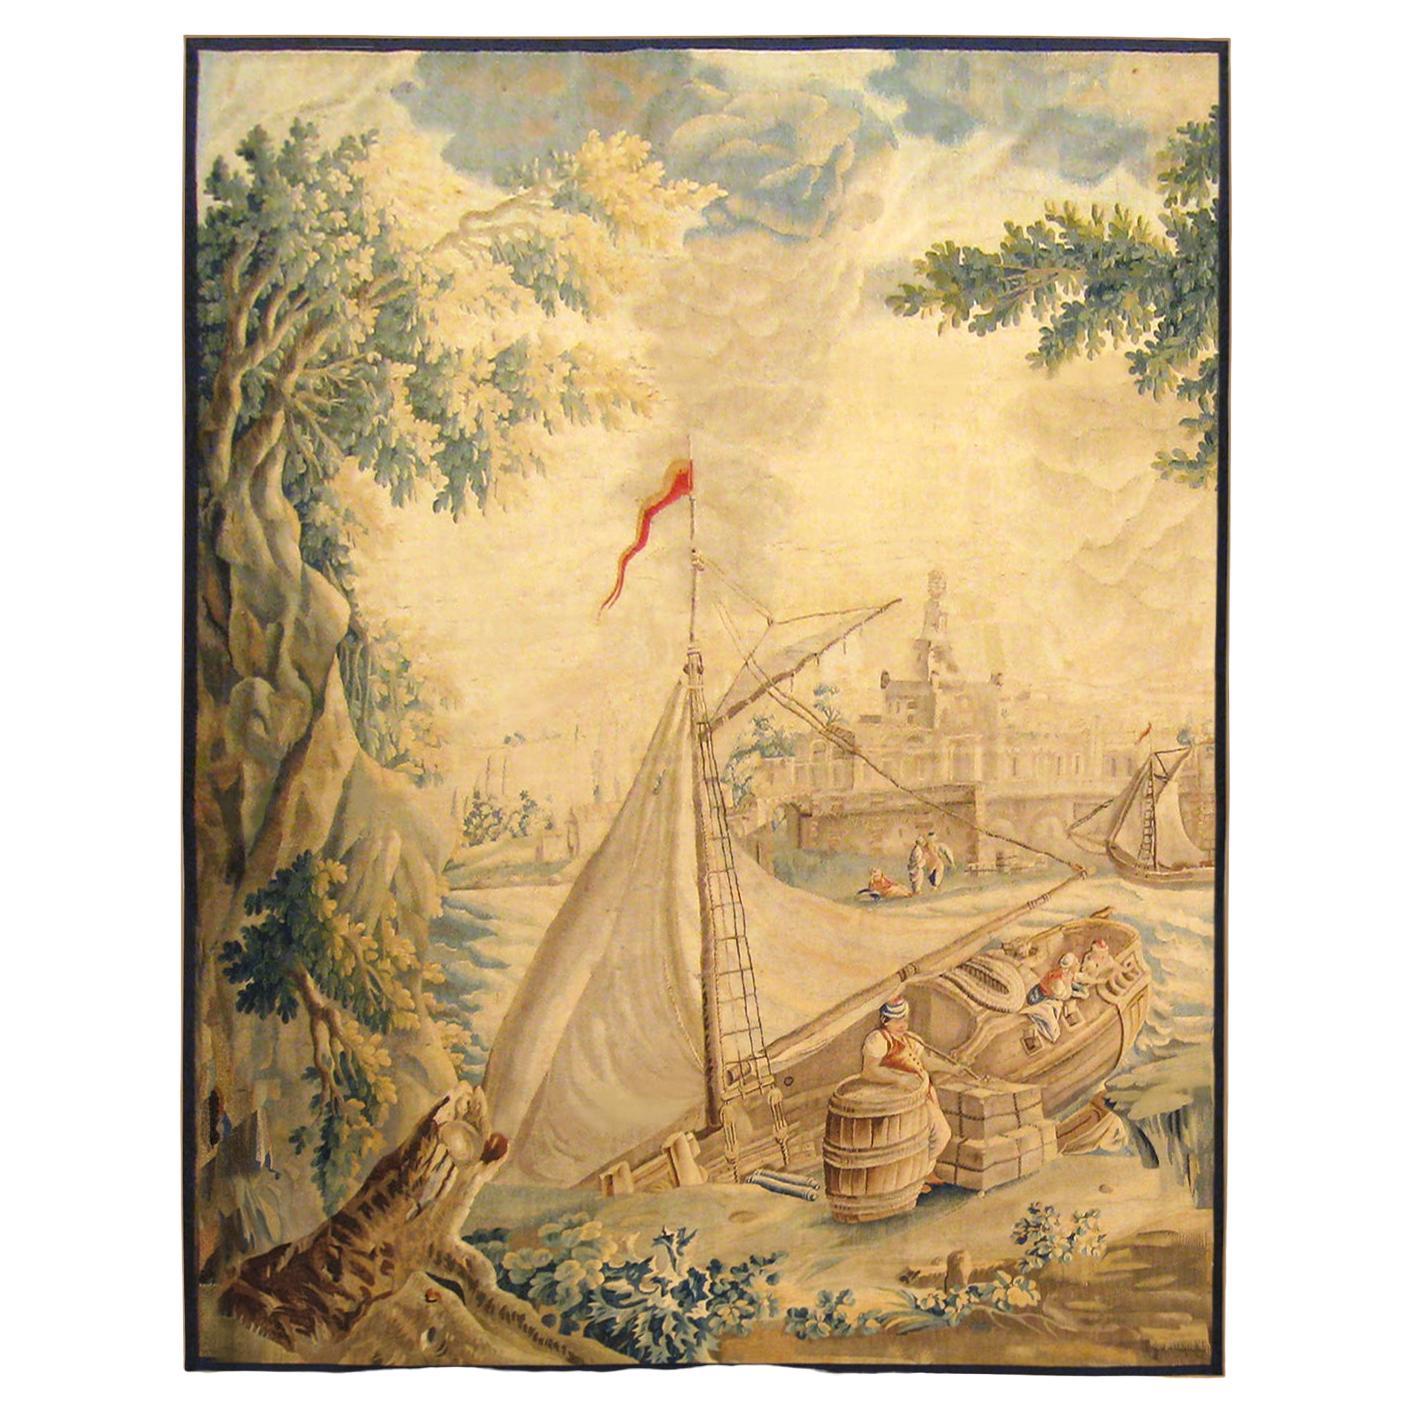 Late 17th Century French Aubusson Tapestry